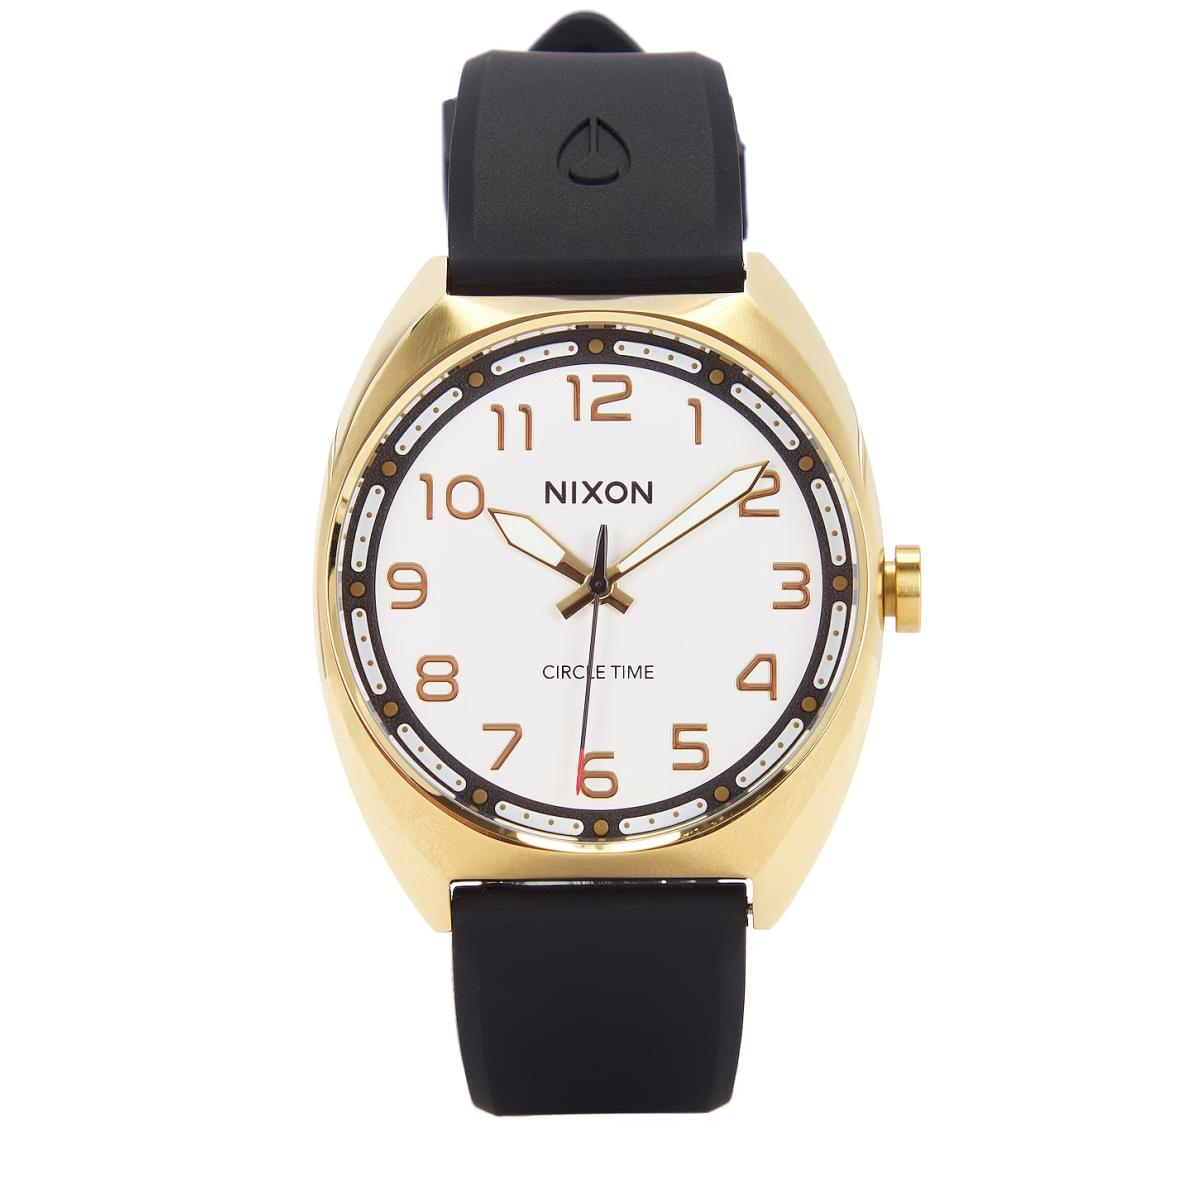 Mens Nixon Mullet Watch Gold White Black Waterproof Silicone Band